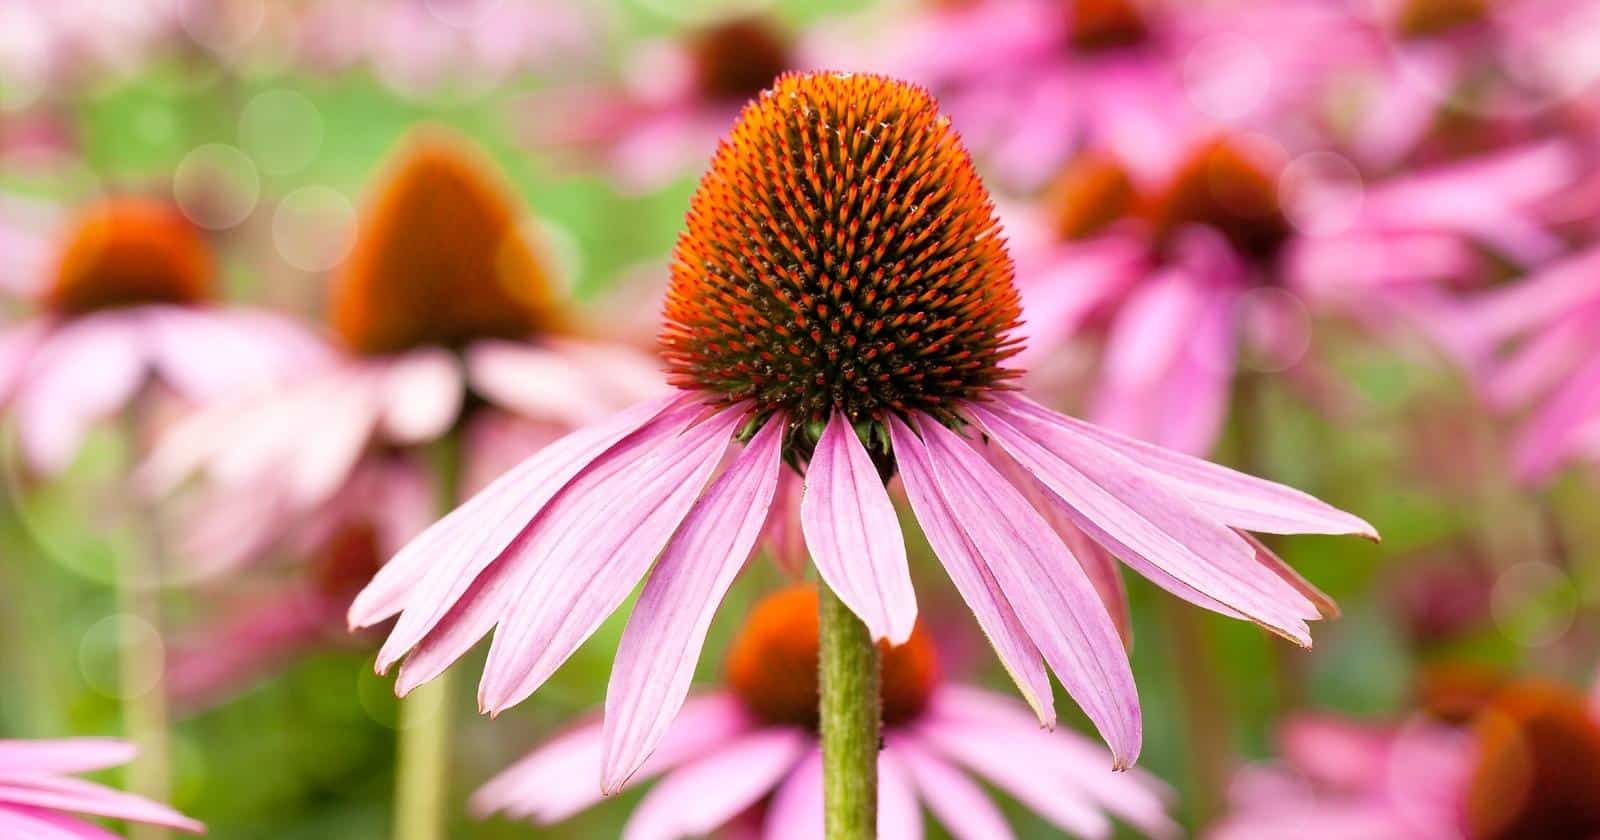 31 Perennials That Thrive in Full Sun Conditions